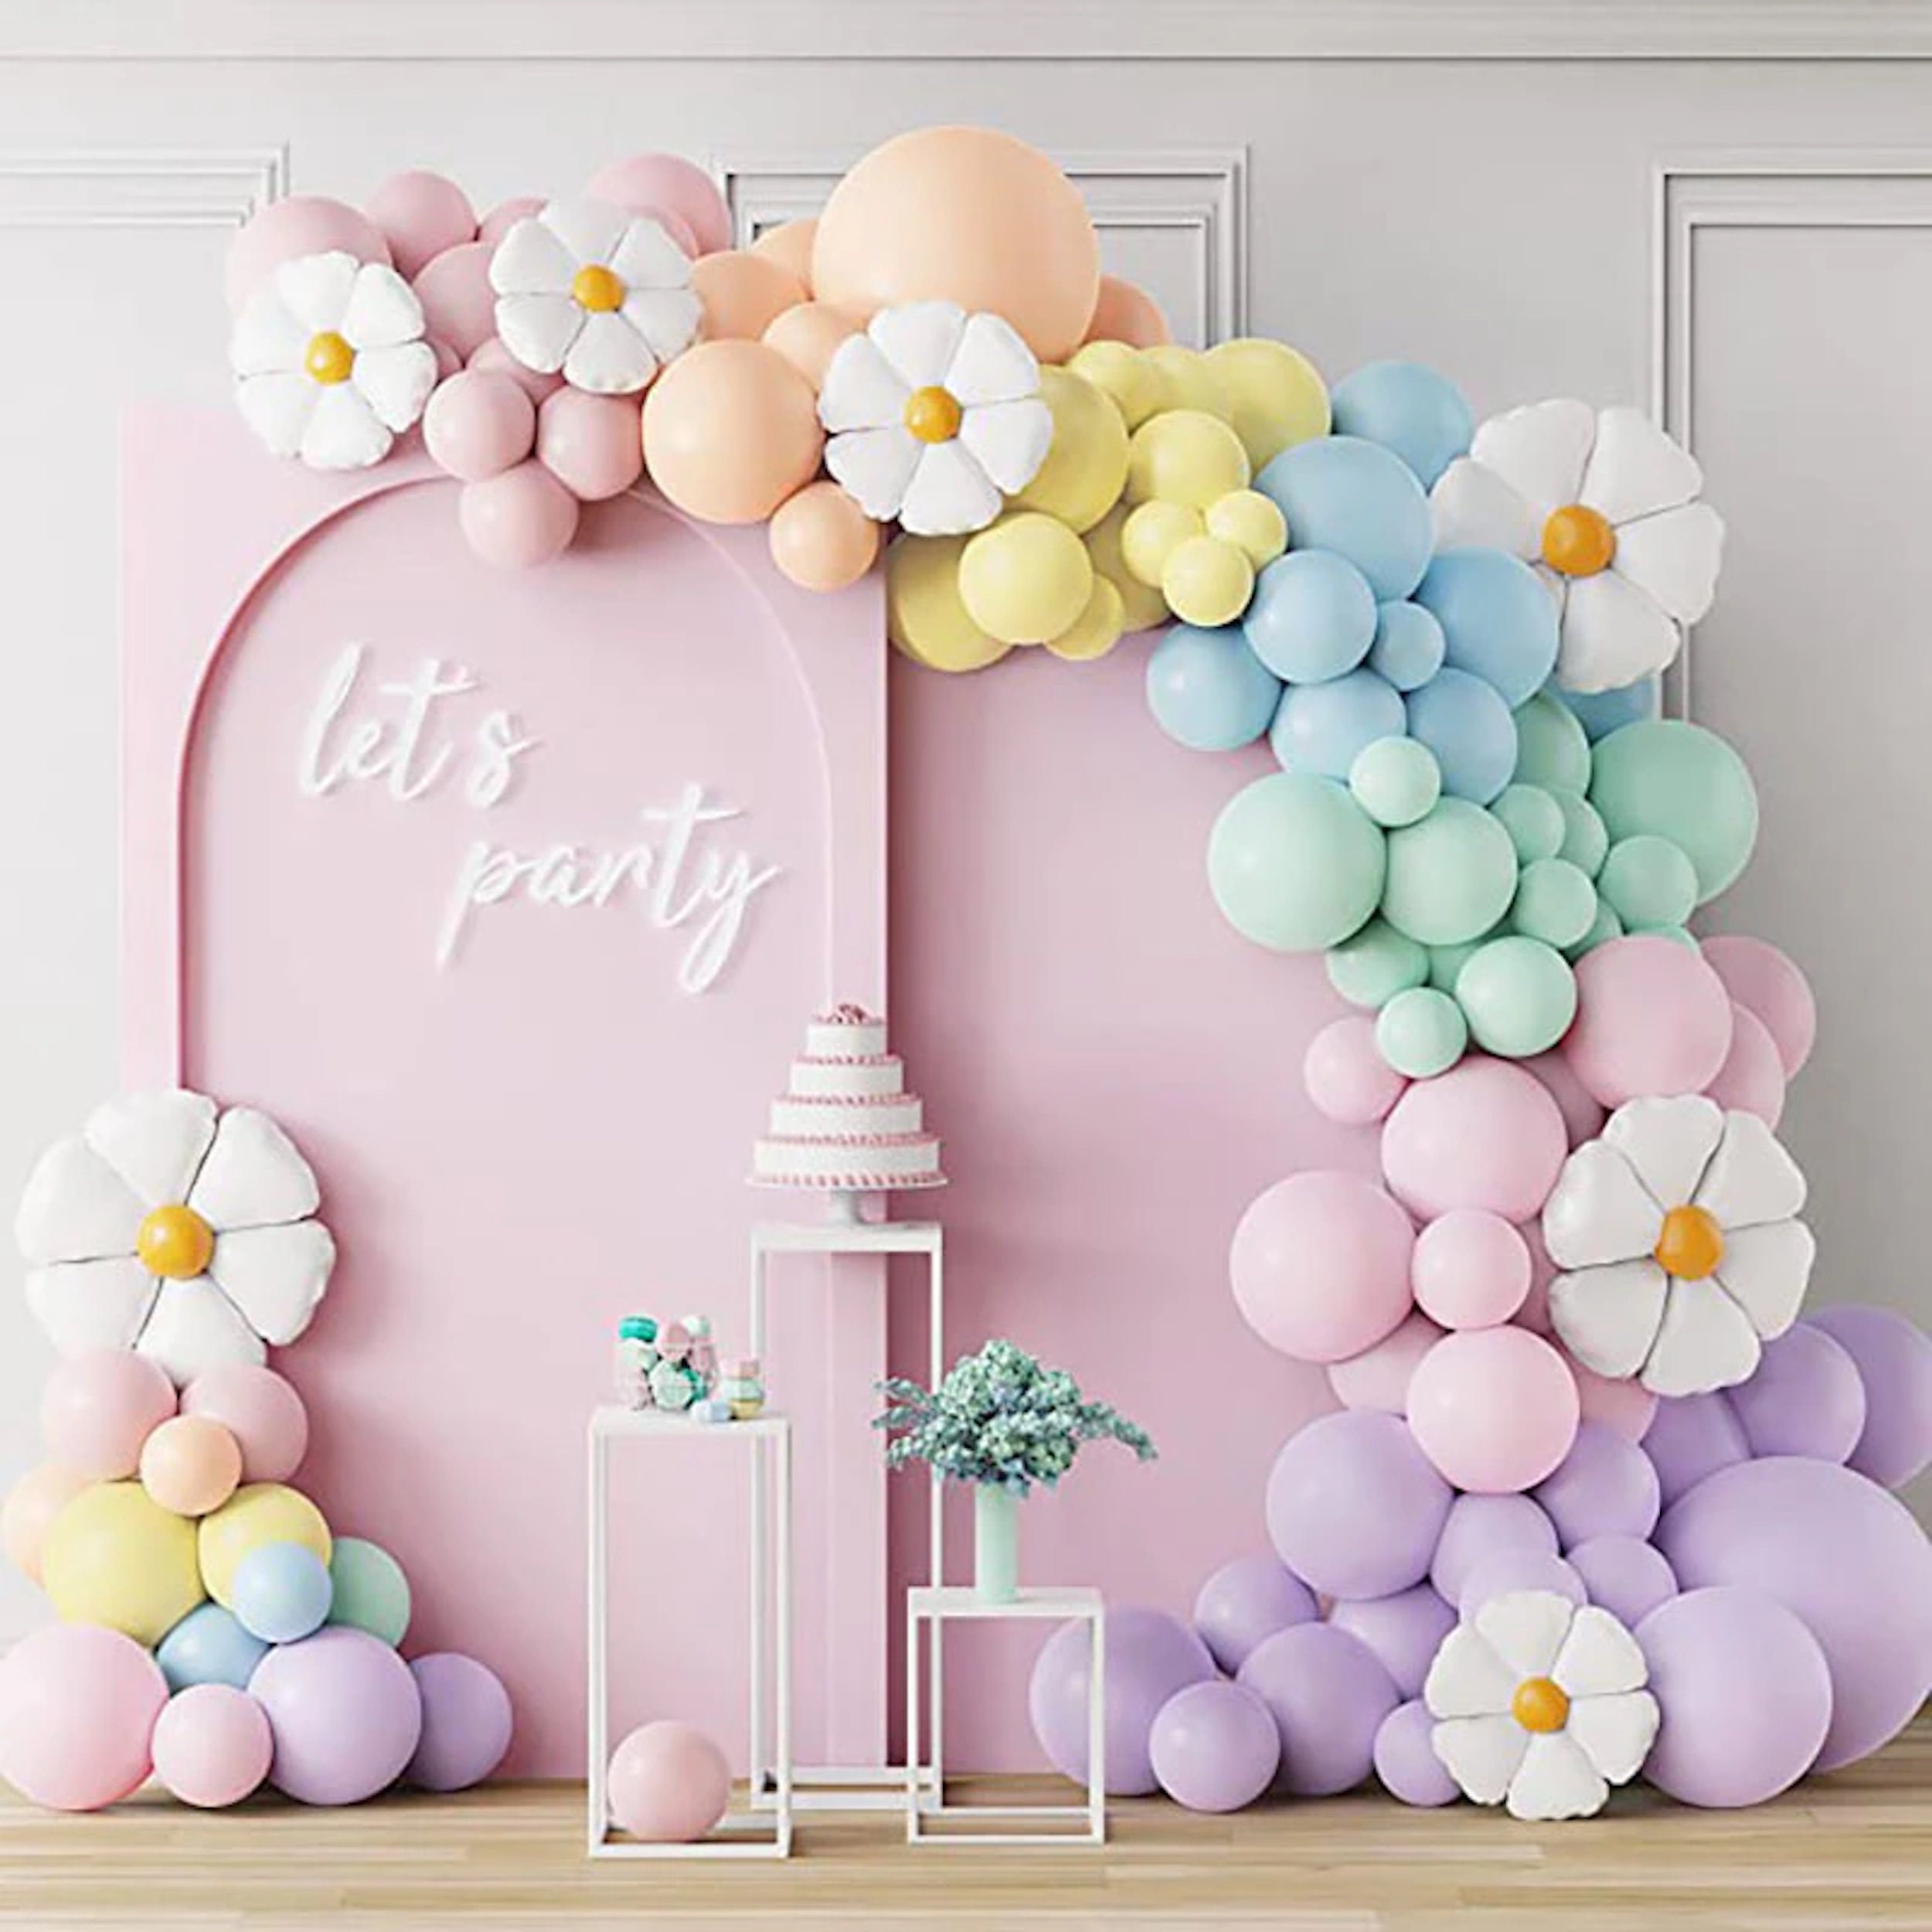 Pastel Party Streamers Backdrop Birthday Decorations Photo Backdrop Streamer  Garland Birthday Party Decor Hen Party Decorations 